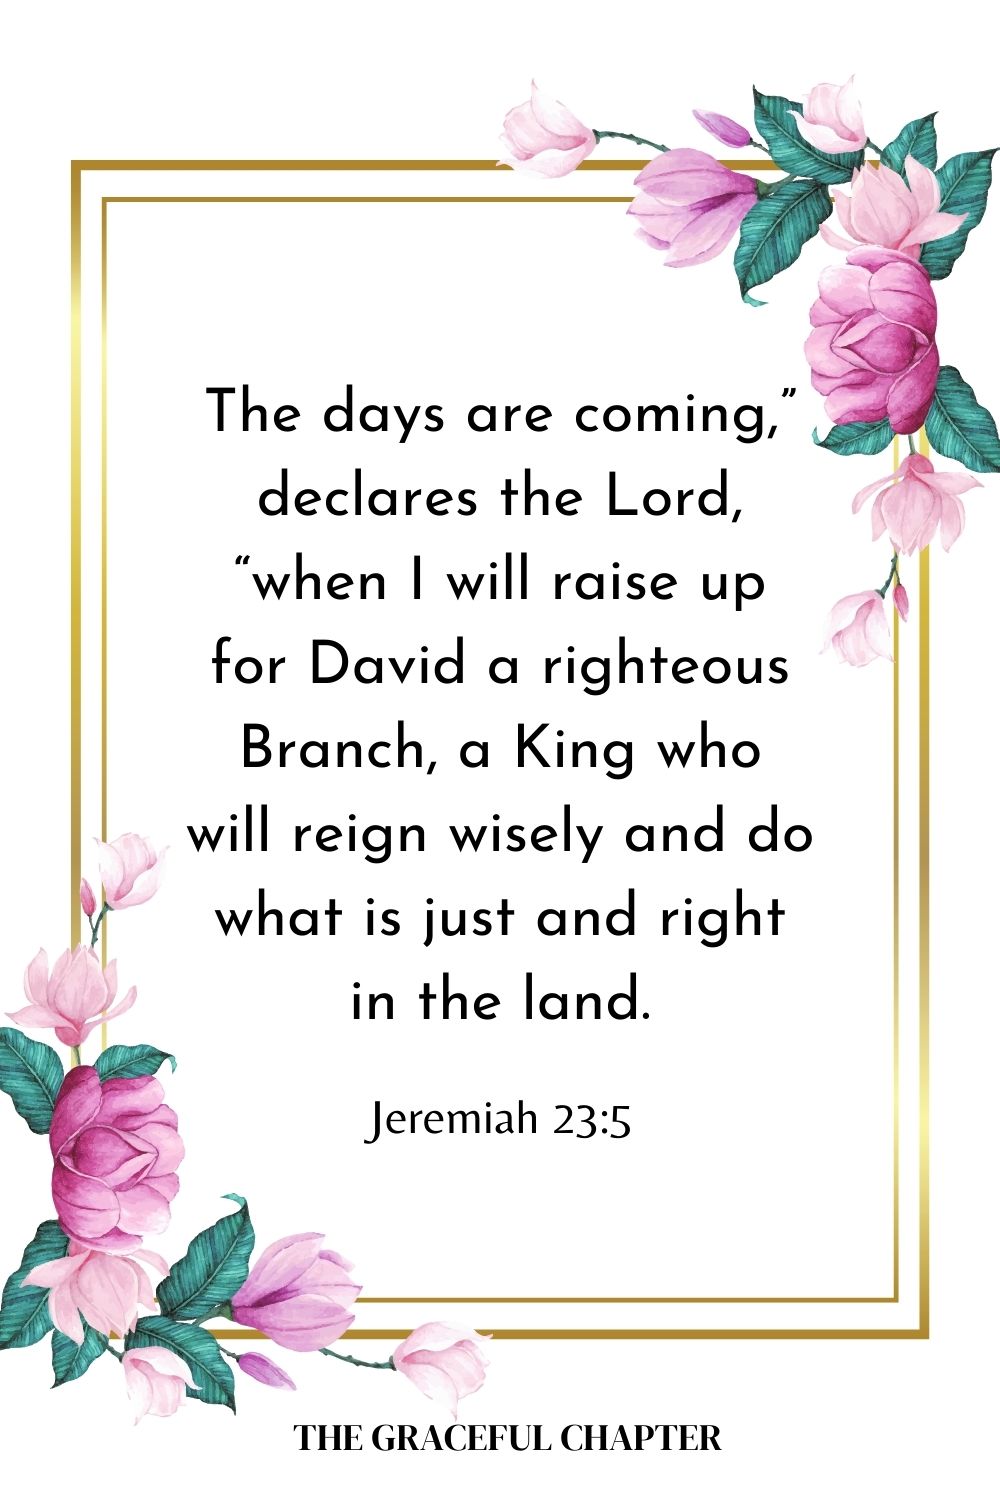 The days are coming,” declares the Lord, “when I will raise up for David a righteous Branch, a King who will reign wisely and do what is just and right in the land. Jeremiah 23:5